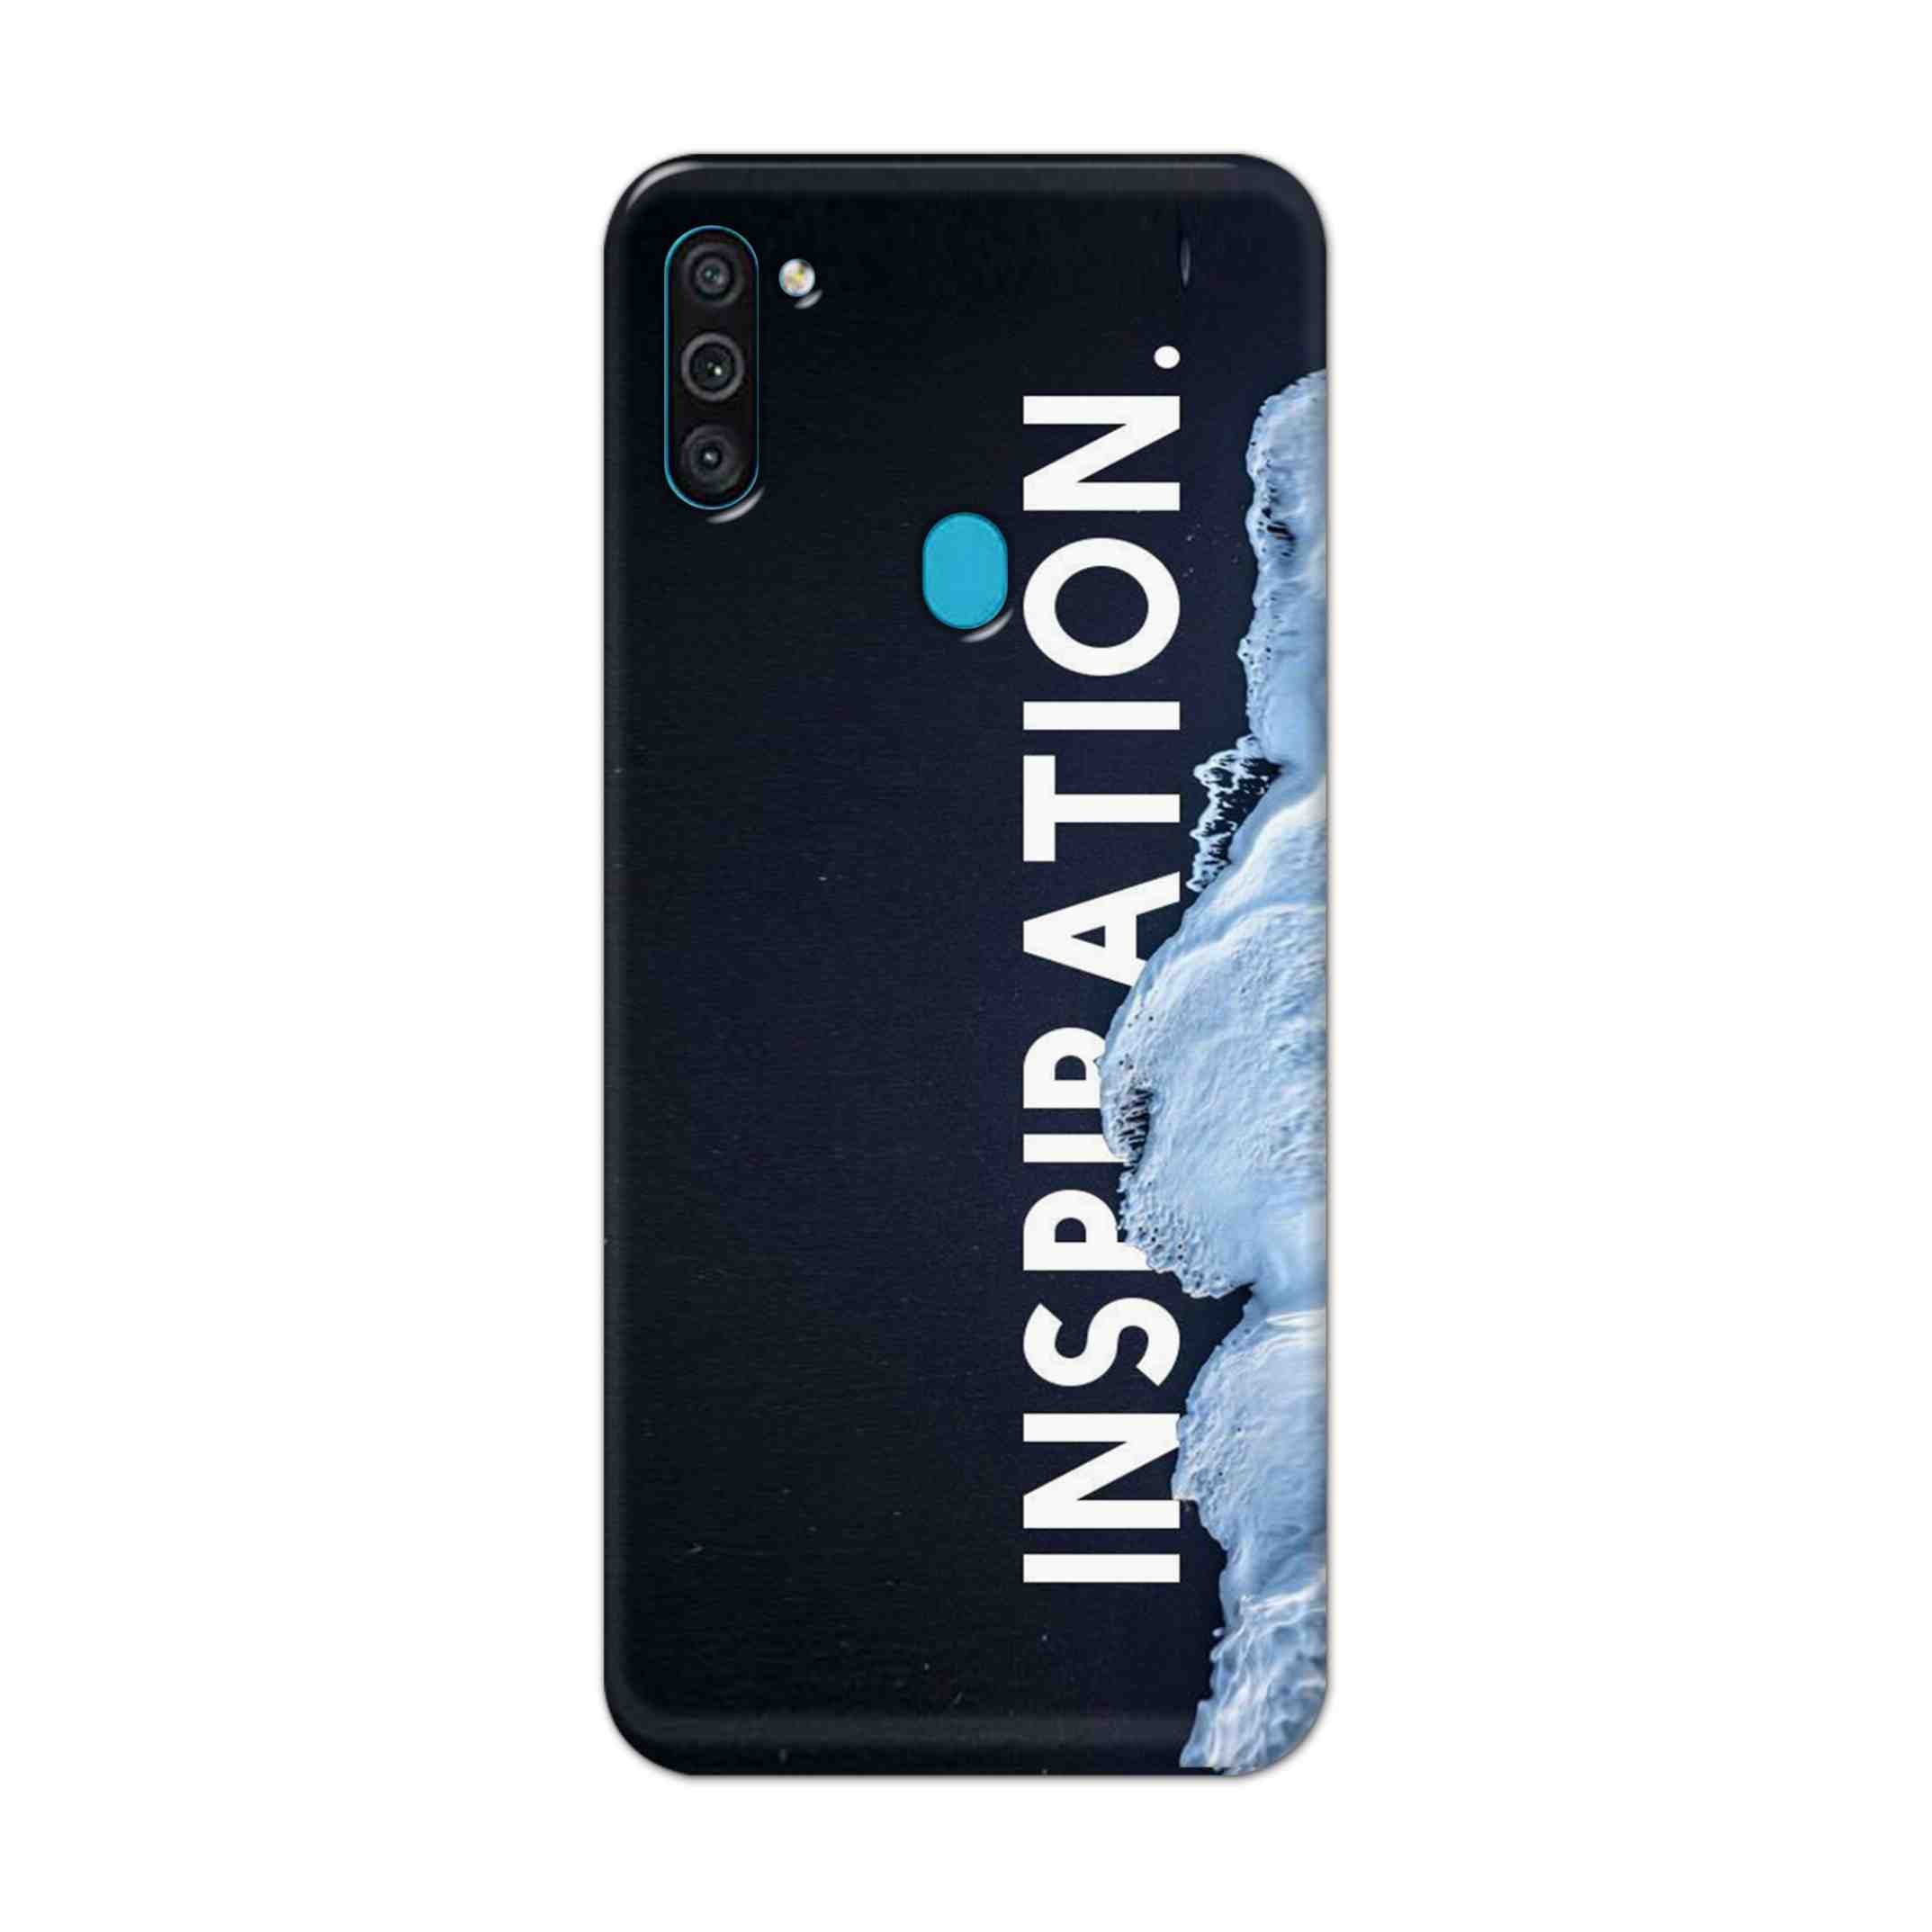 Buy Inspiration Hard Back Mobile Phone Case Cover For Samsung Galaxy M11 Online